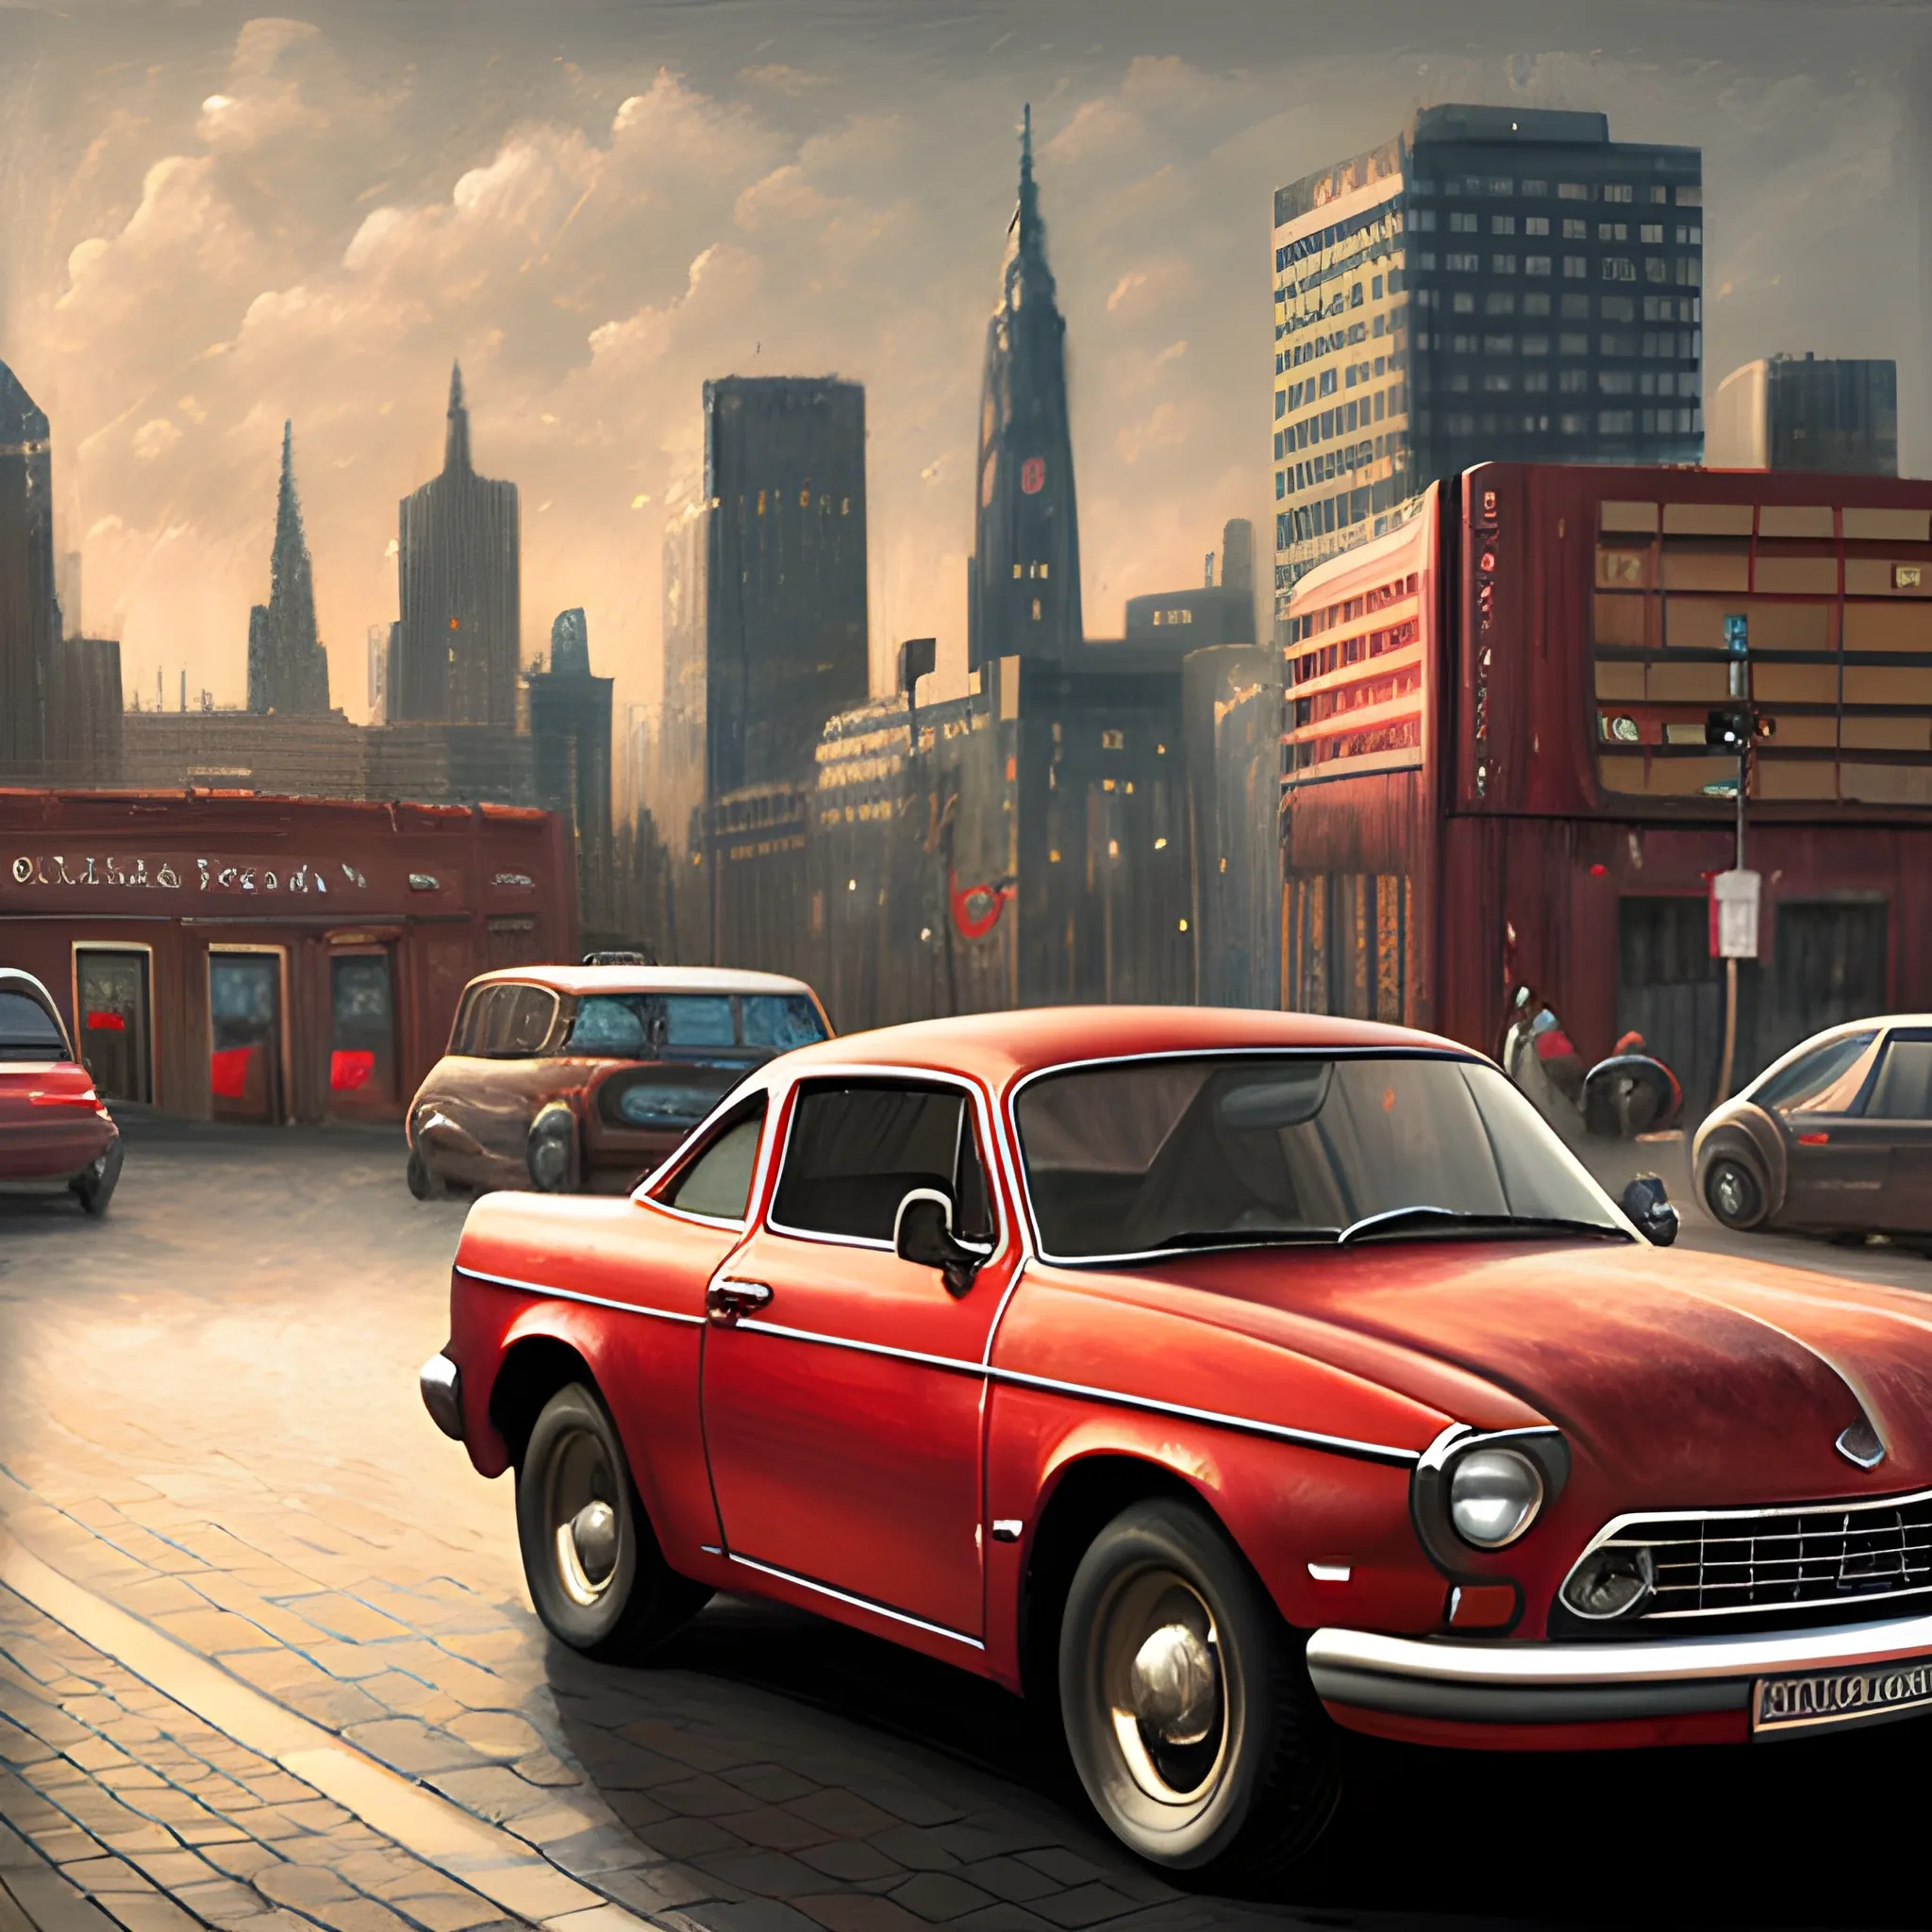 "Create a realistic close-up painting of a red car with the words 'Been here' engraved on it, set against a blurred urban backdrop, with natural lighting that highlights the curves and details of the vehicle."